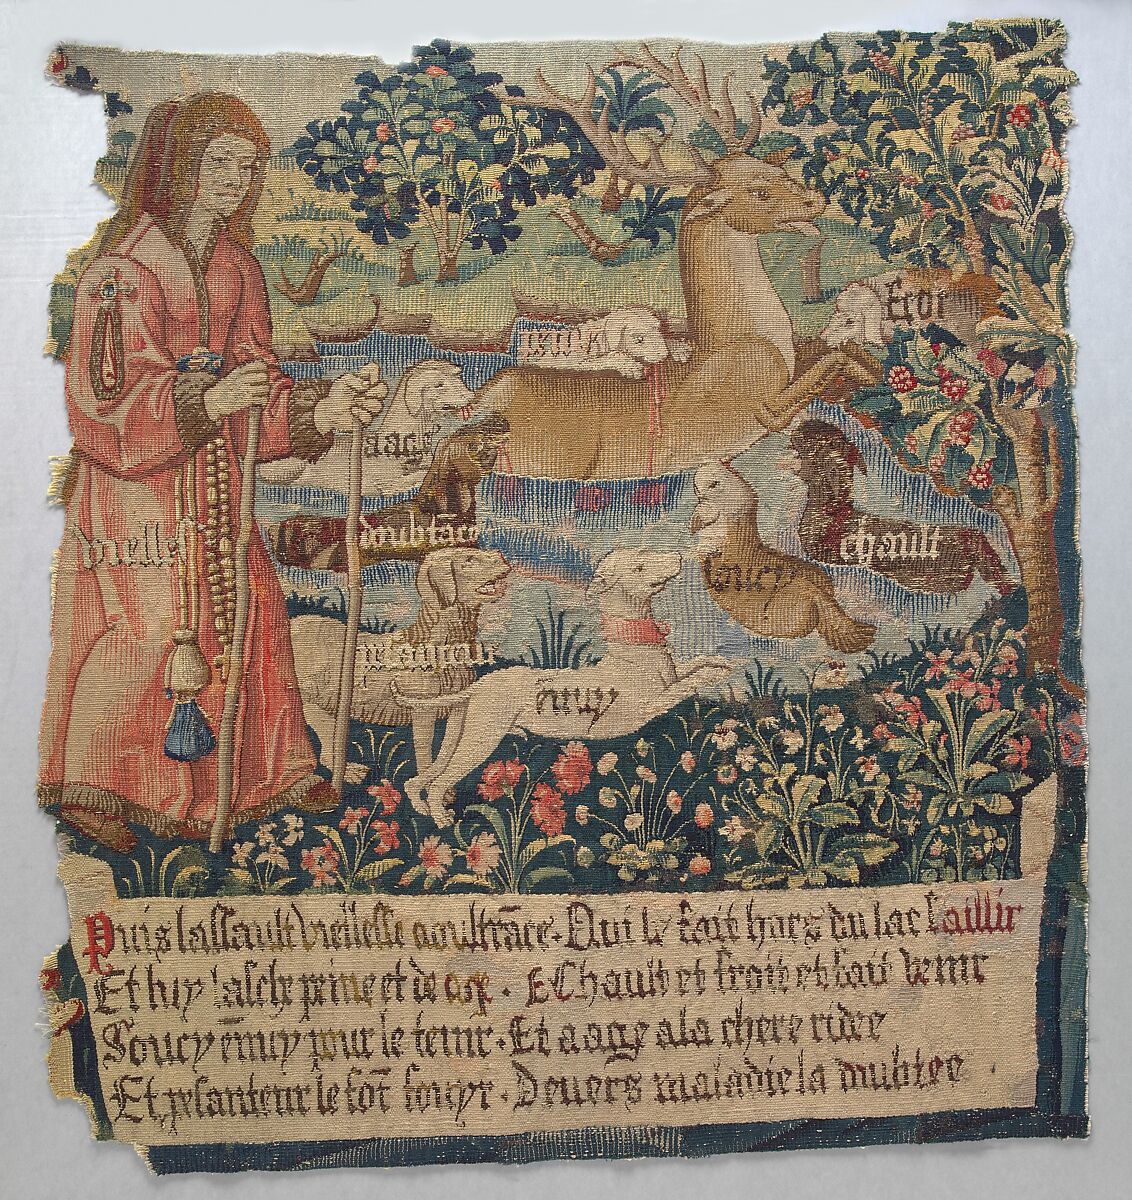 Old Age Drives the Stag out of a Lake and the Hounds Cold, Heat, Anxiety, Vexation, Heaviness, Fear, Age, and Grief Attack Him, (from The Hunt of the Frail Stag), Wool warp,  wool and silk wefts, South Netherlandish